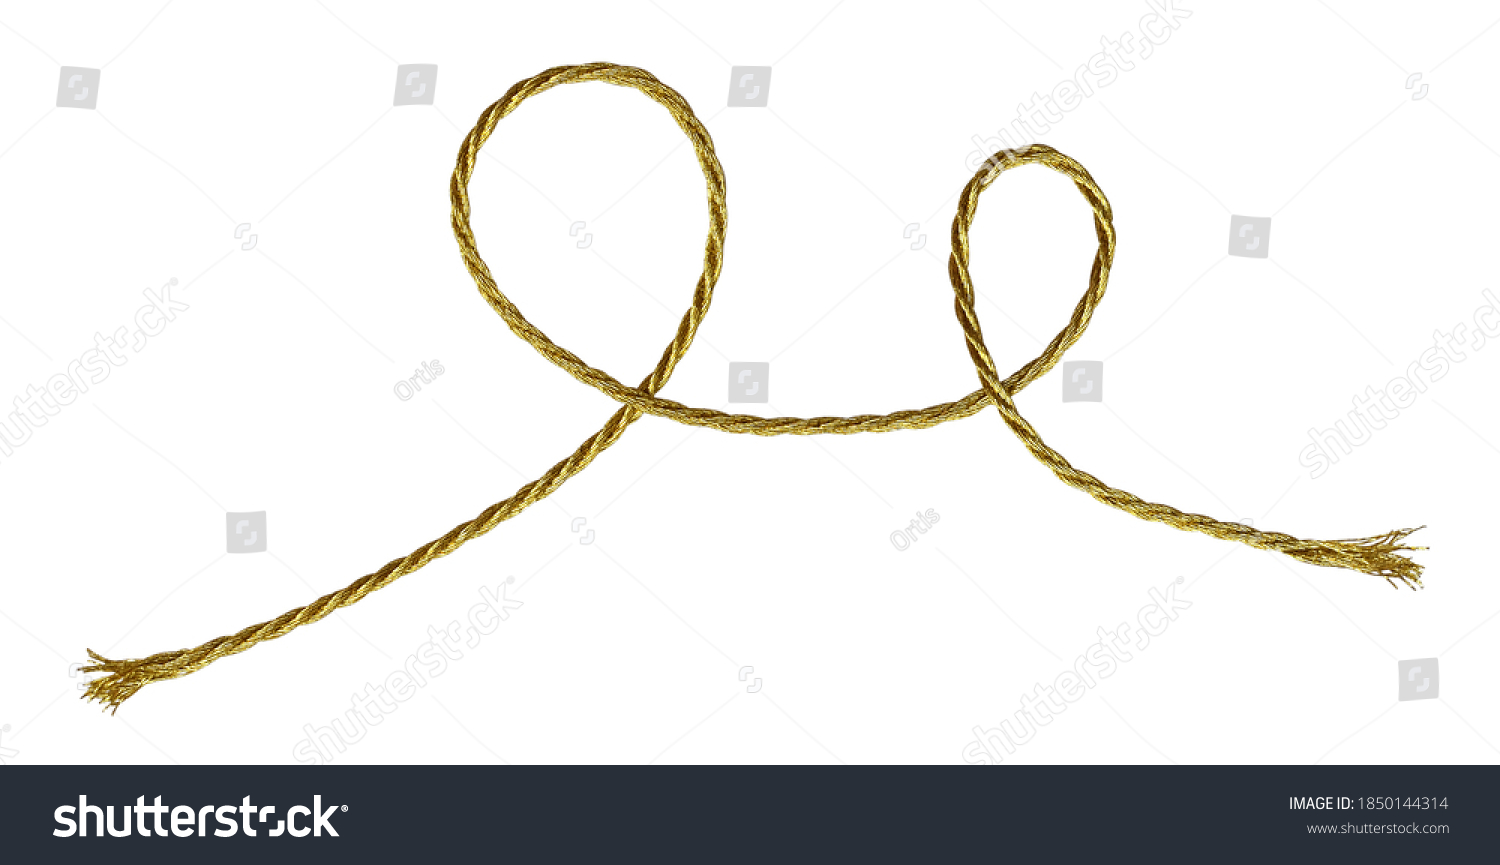 Twisted golden metallic rope isolated on white #1850144314